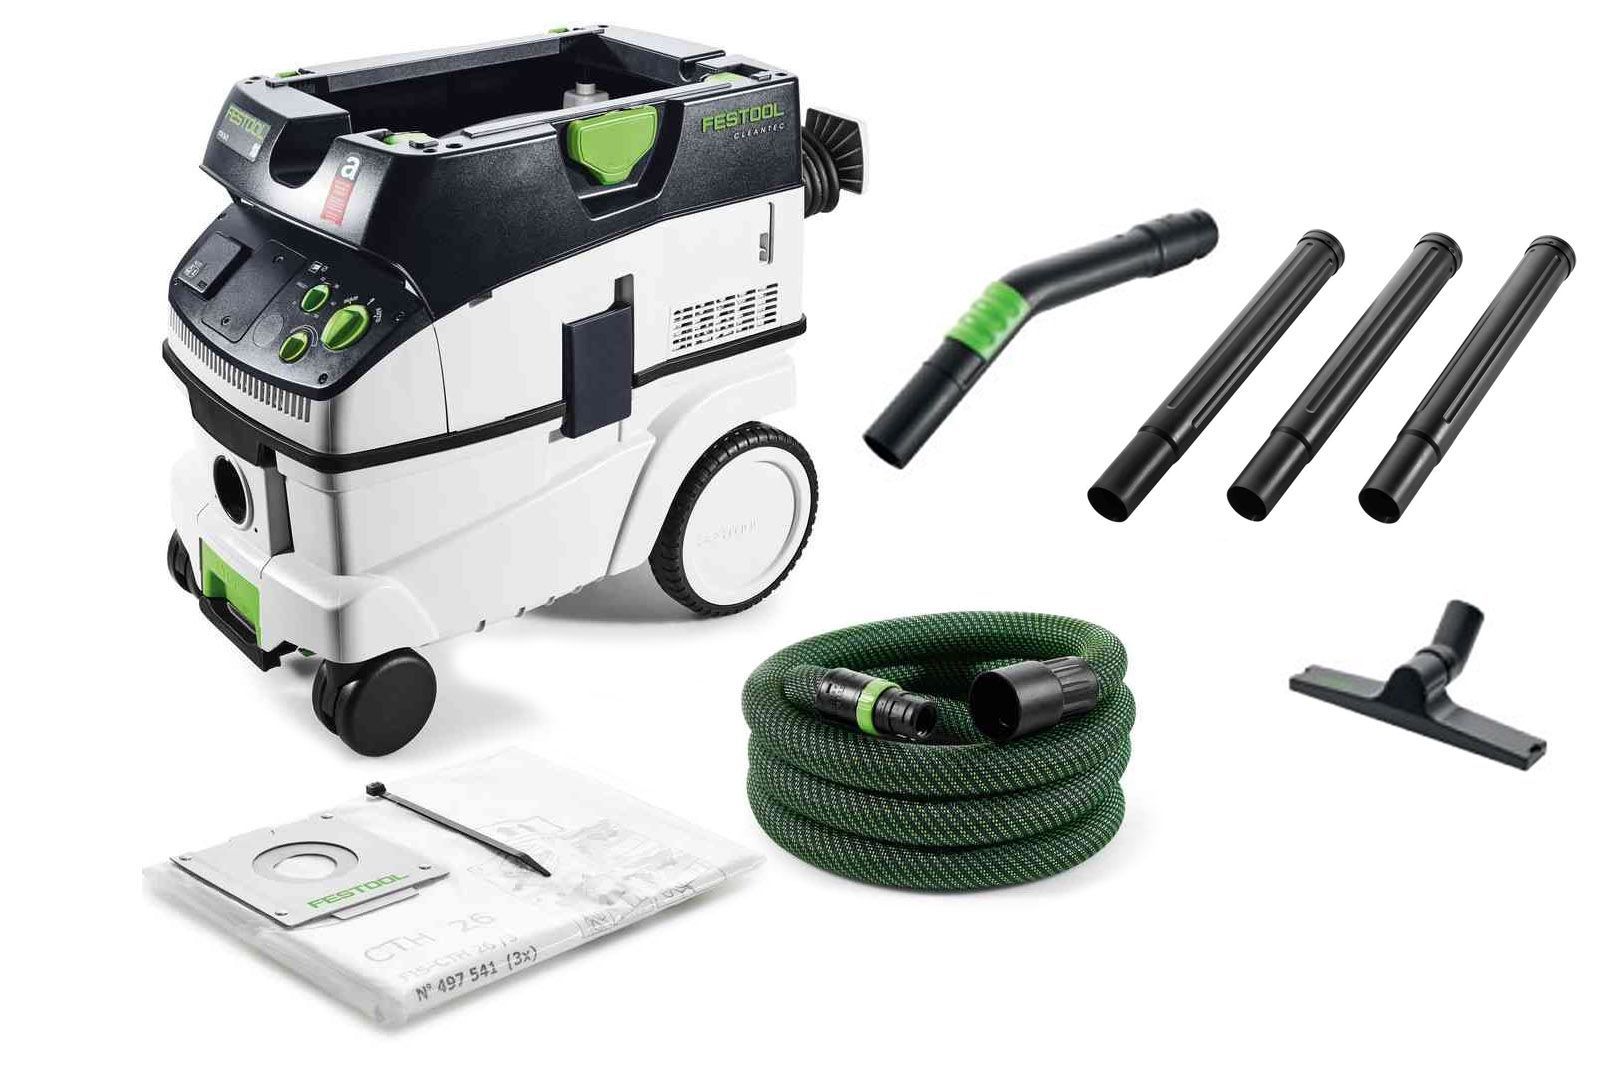 CTH 26l H Class Dust Extractor 576917 by Festool